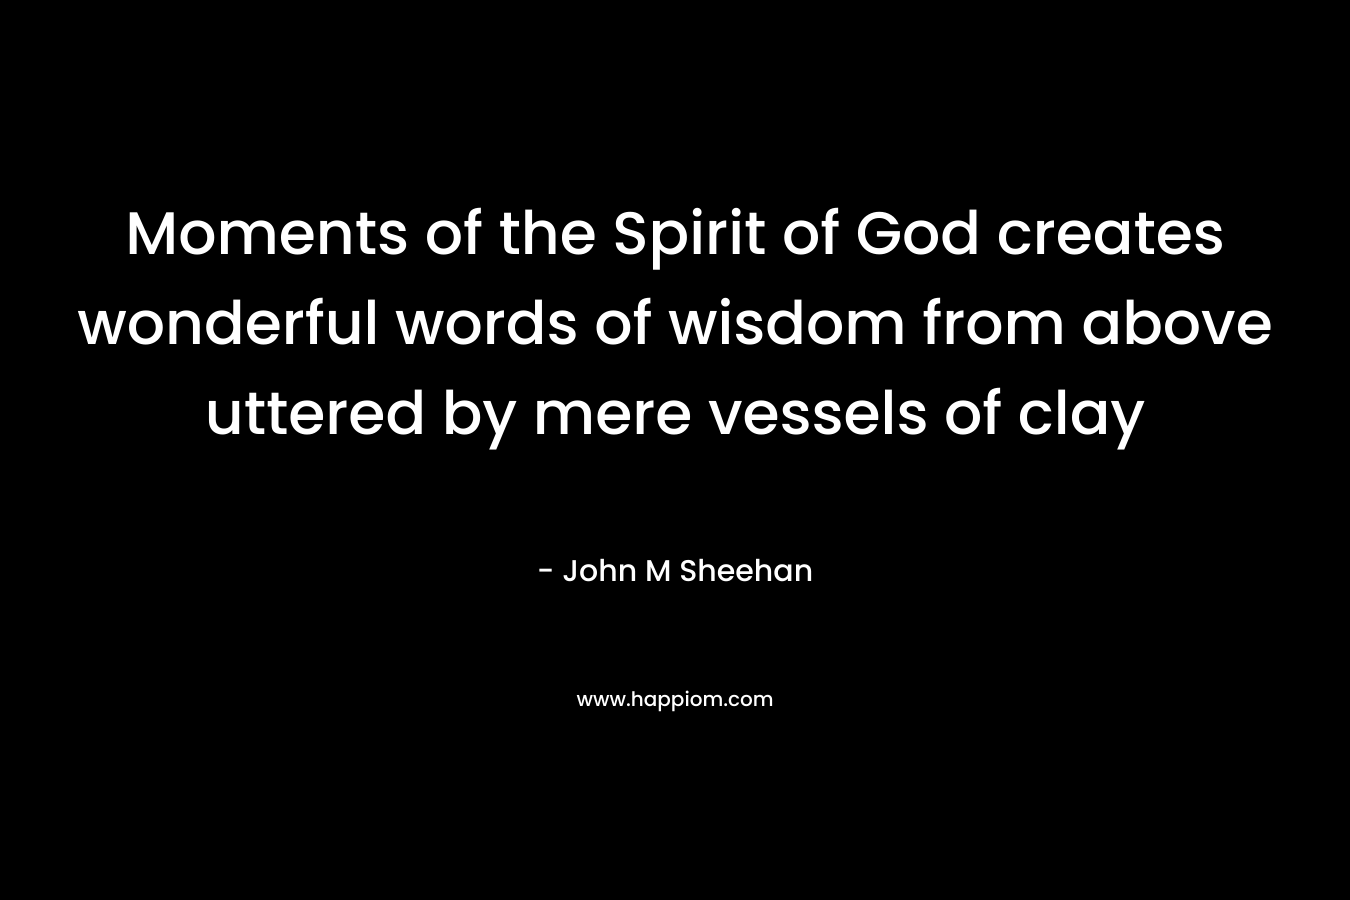 Moments of the Spirit of God creates wonderful words of wisdom from above uttered by mere vessels of clay